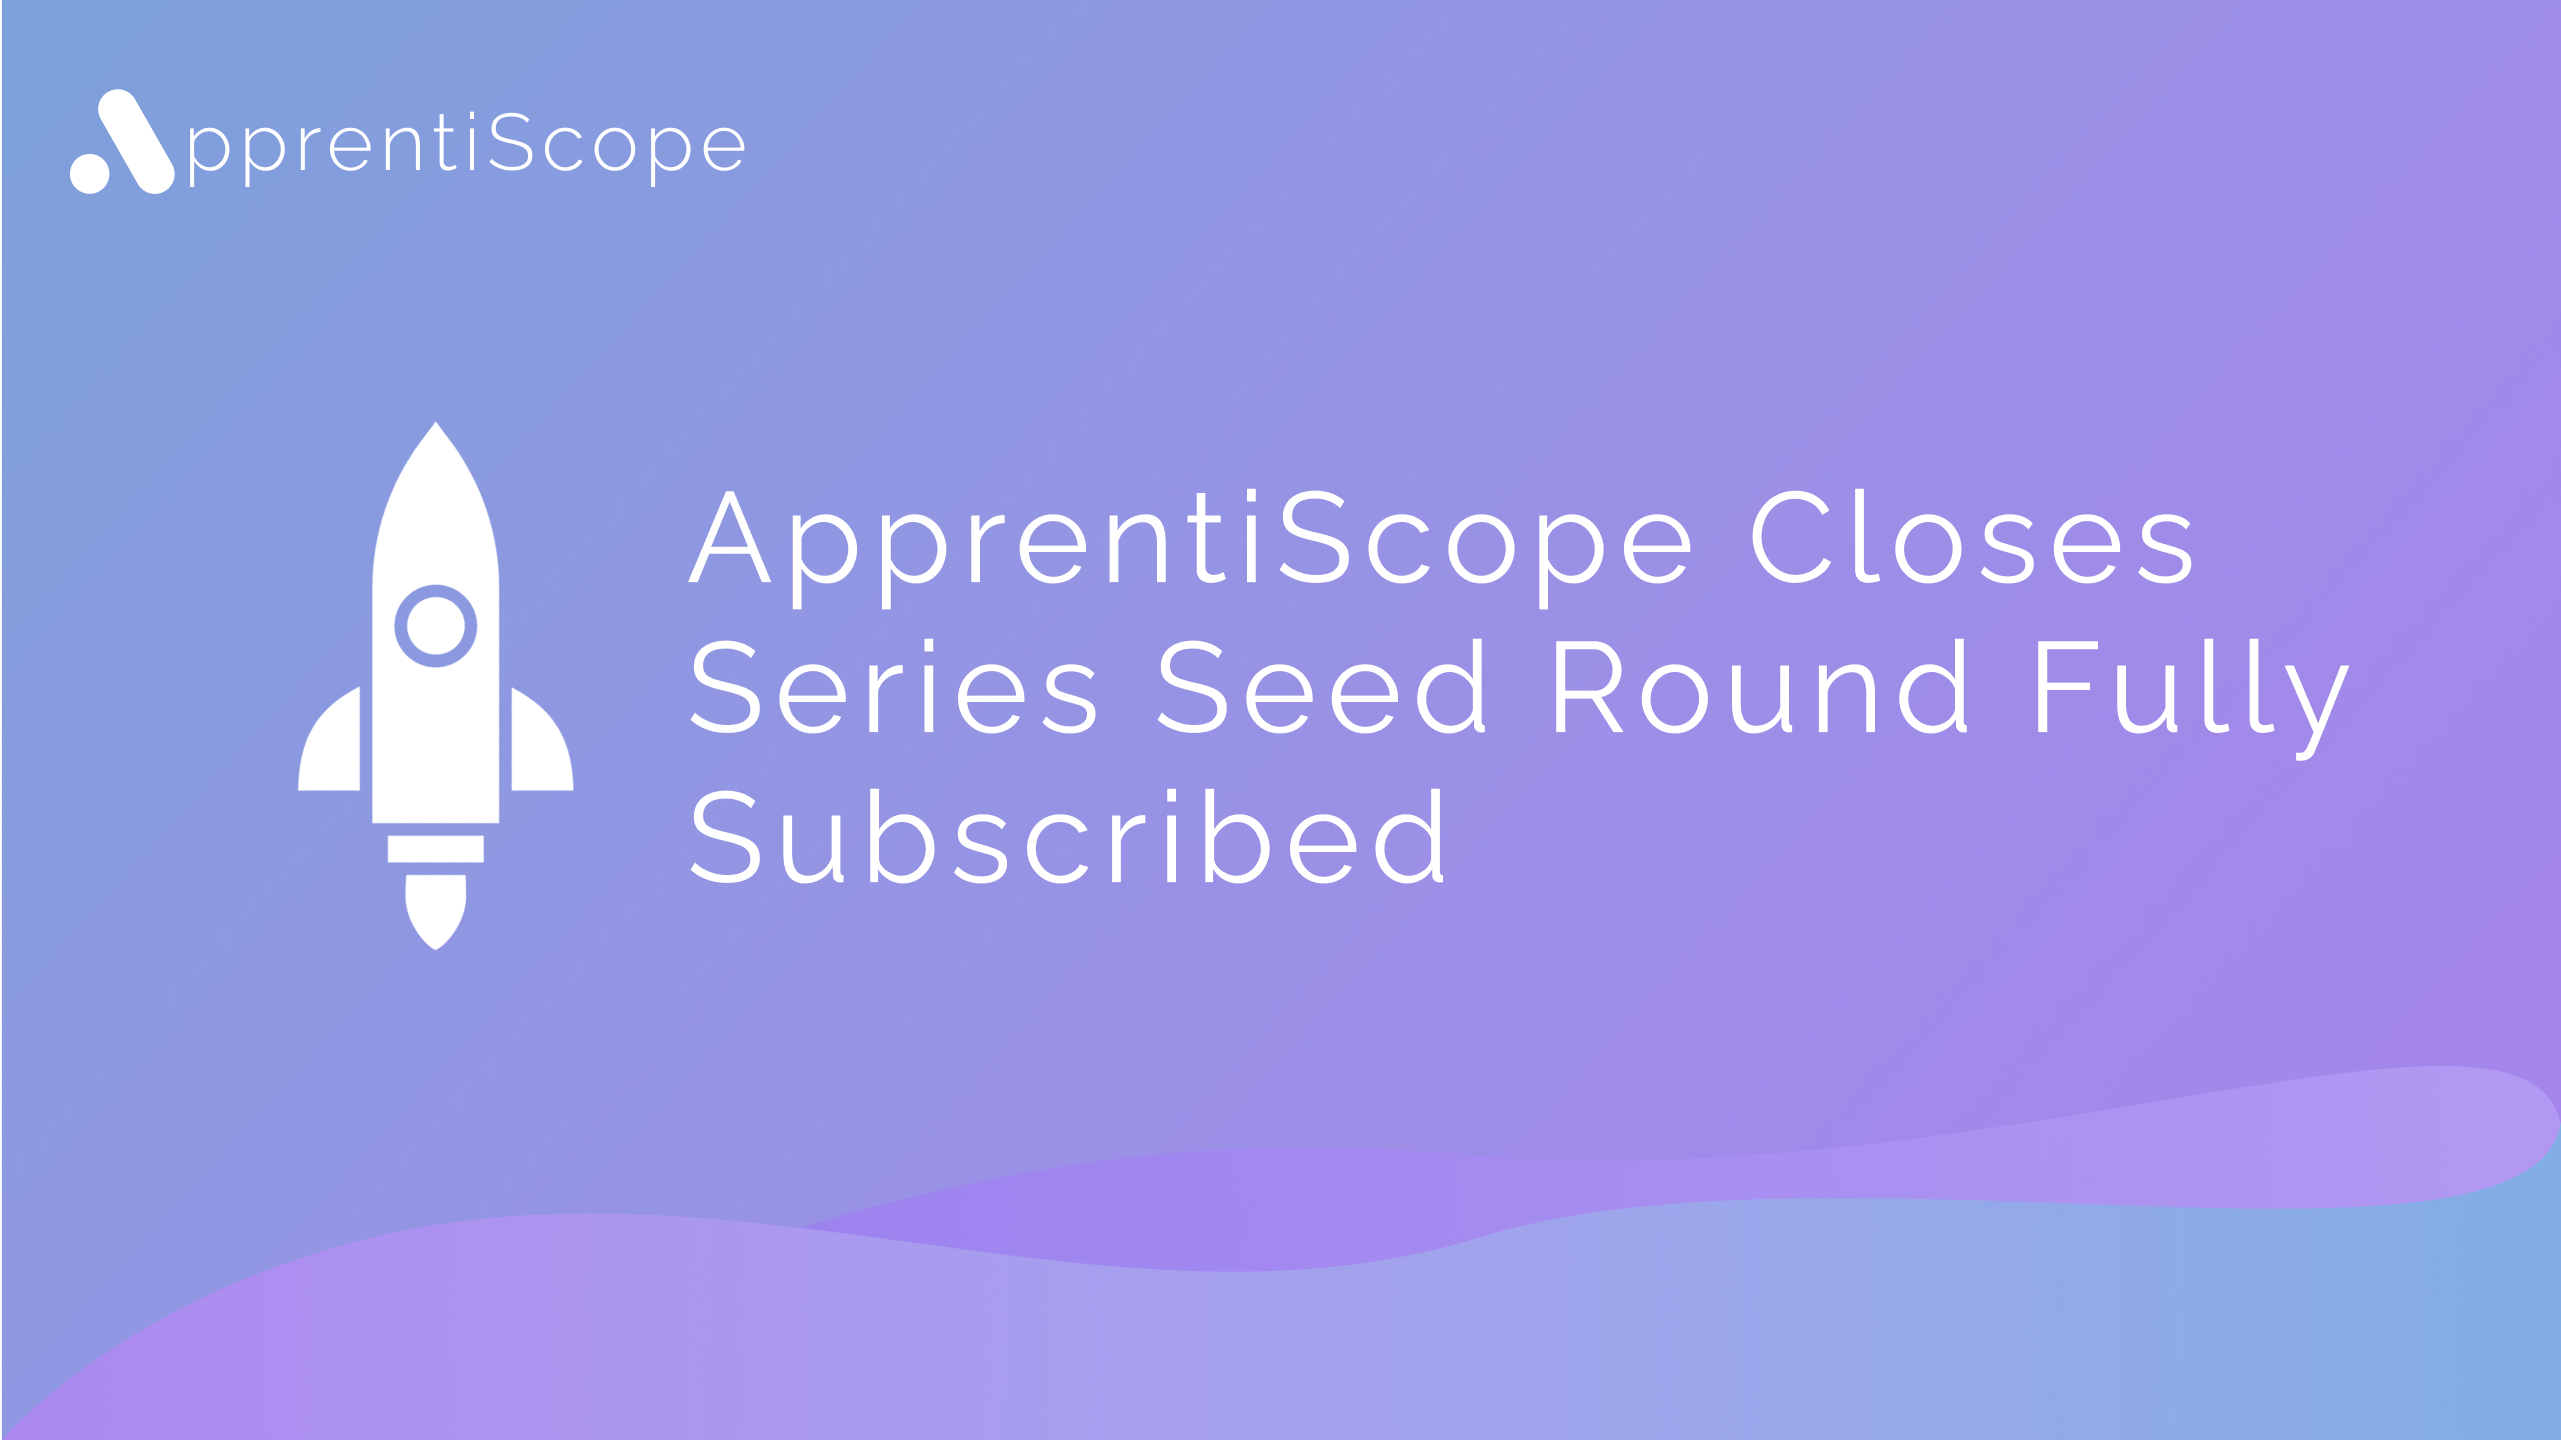 Software Startup focused on Scaling Apprenticeships Closes Series Seed Round Fully Subscribed